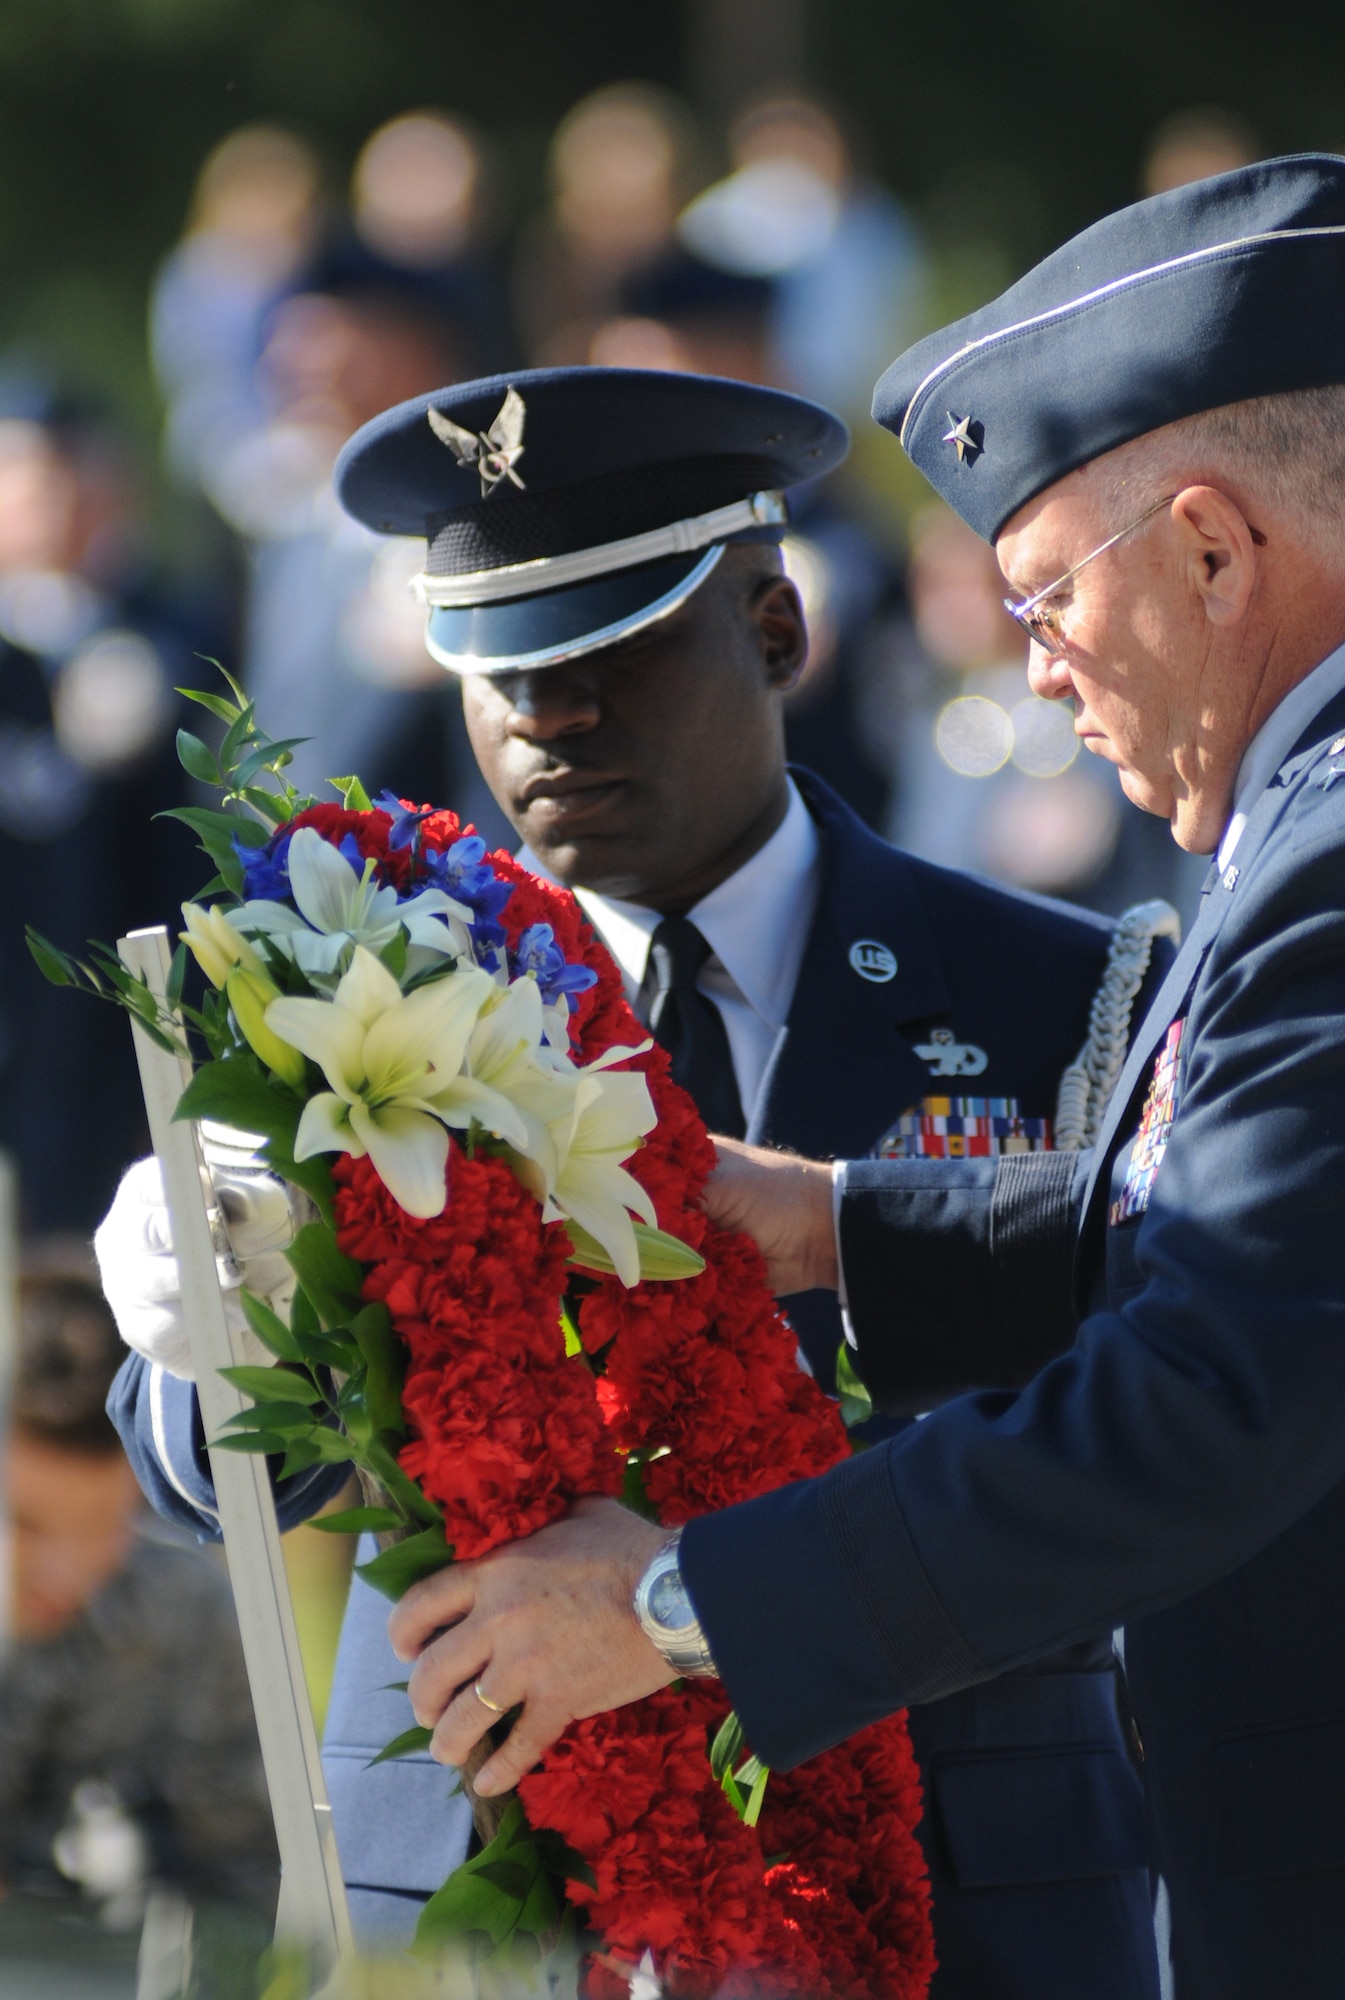 Charlotte, N.C. – Brig. Gen. Iwan Clontz (right) and Chief Master Sgt. Maurice Williams of move a wreath into position during the memorial service honoring North Carolina Air National Guardsmen deceased within the last year. (NCANG photo by Tech. Sgt. Brian E. Christiansen)